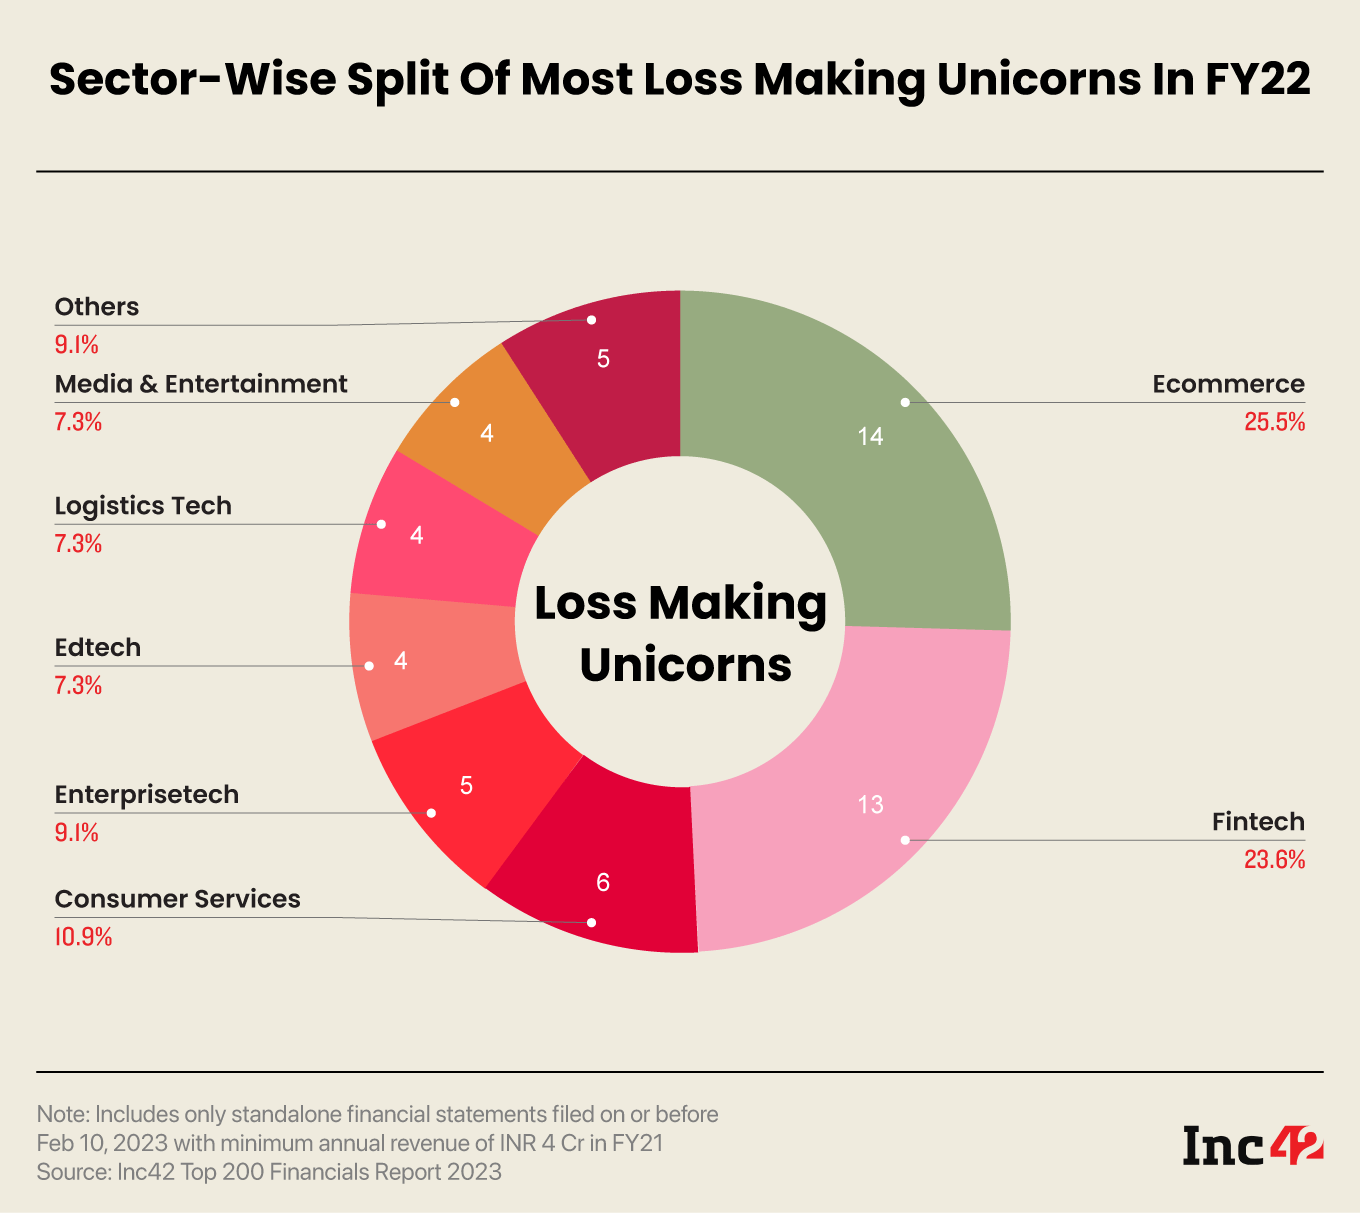 With Profits Taking A Back Seat, 55 Of India’s Most-Valued Startups Incurred Losses In FY22